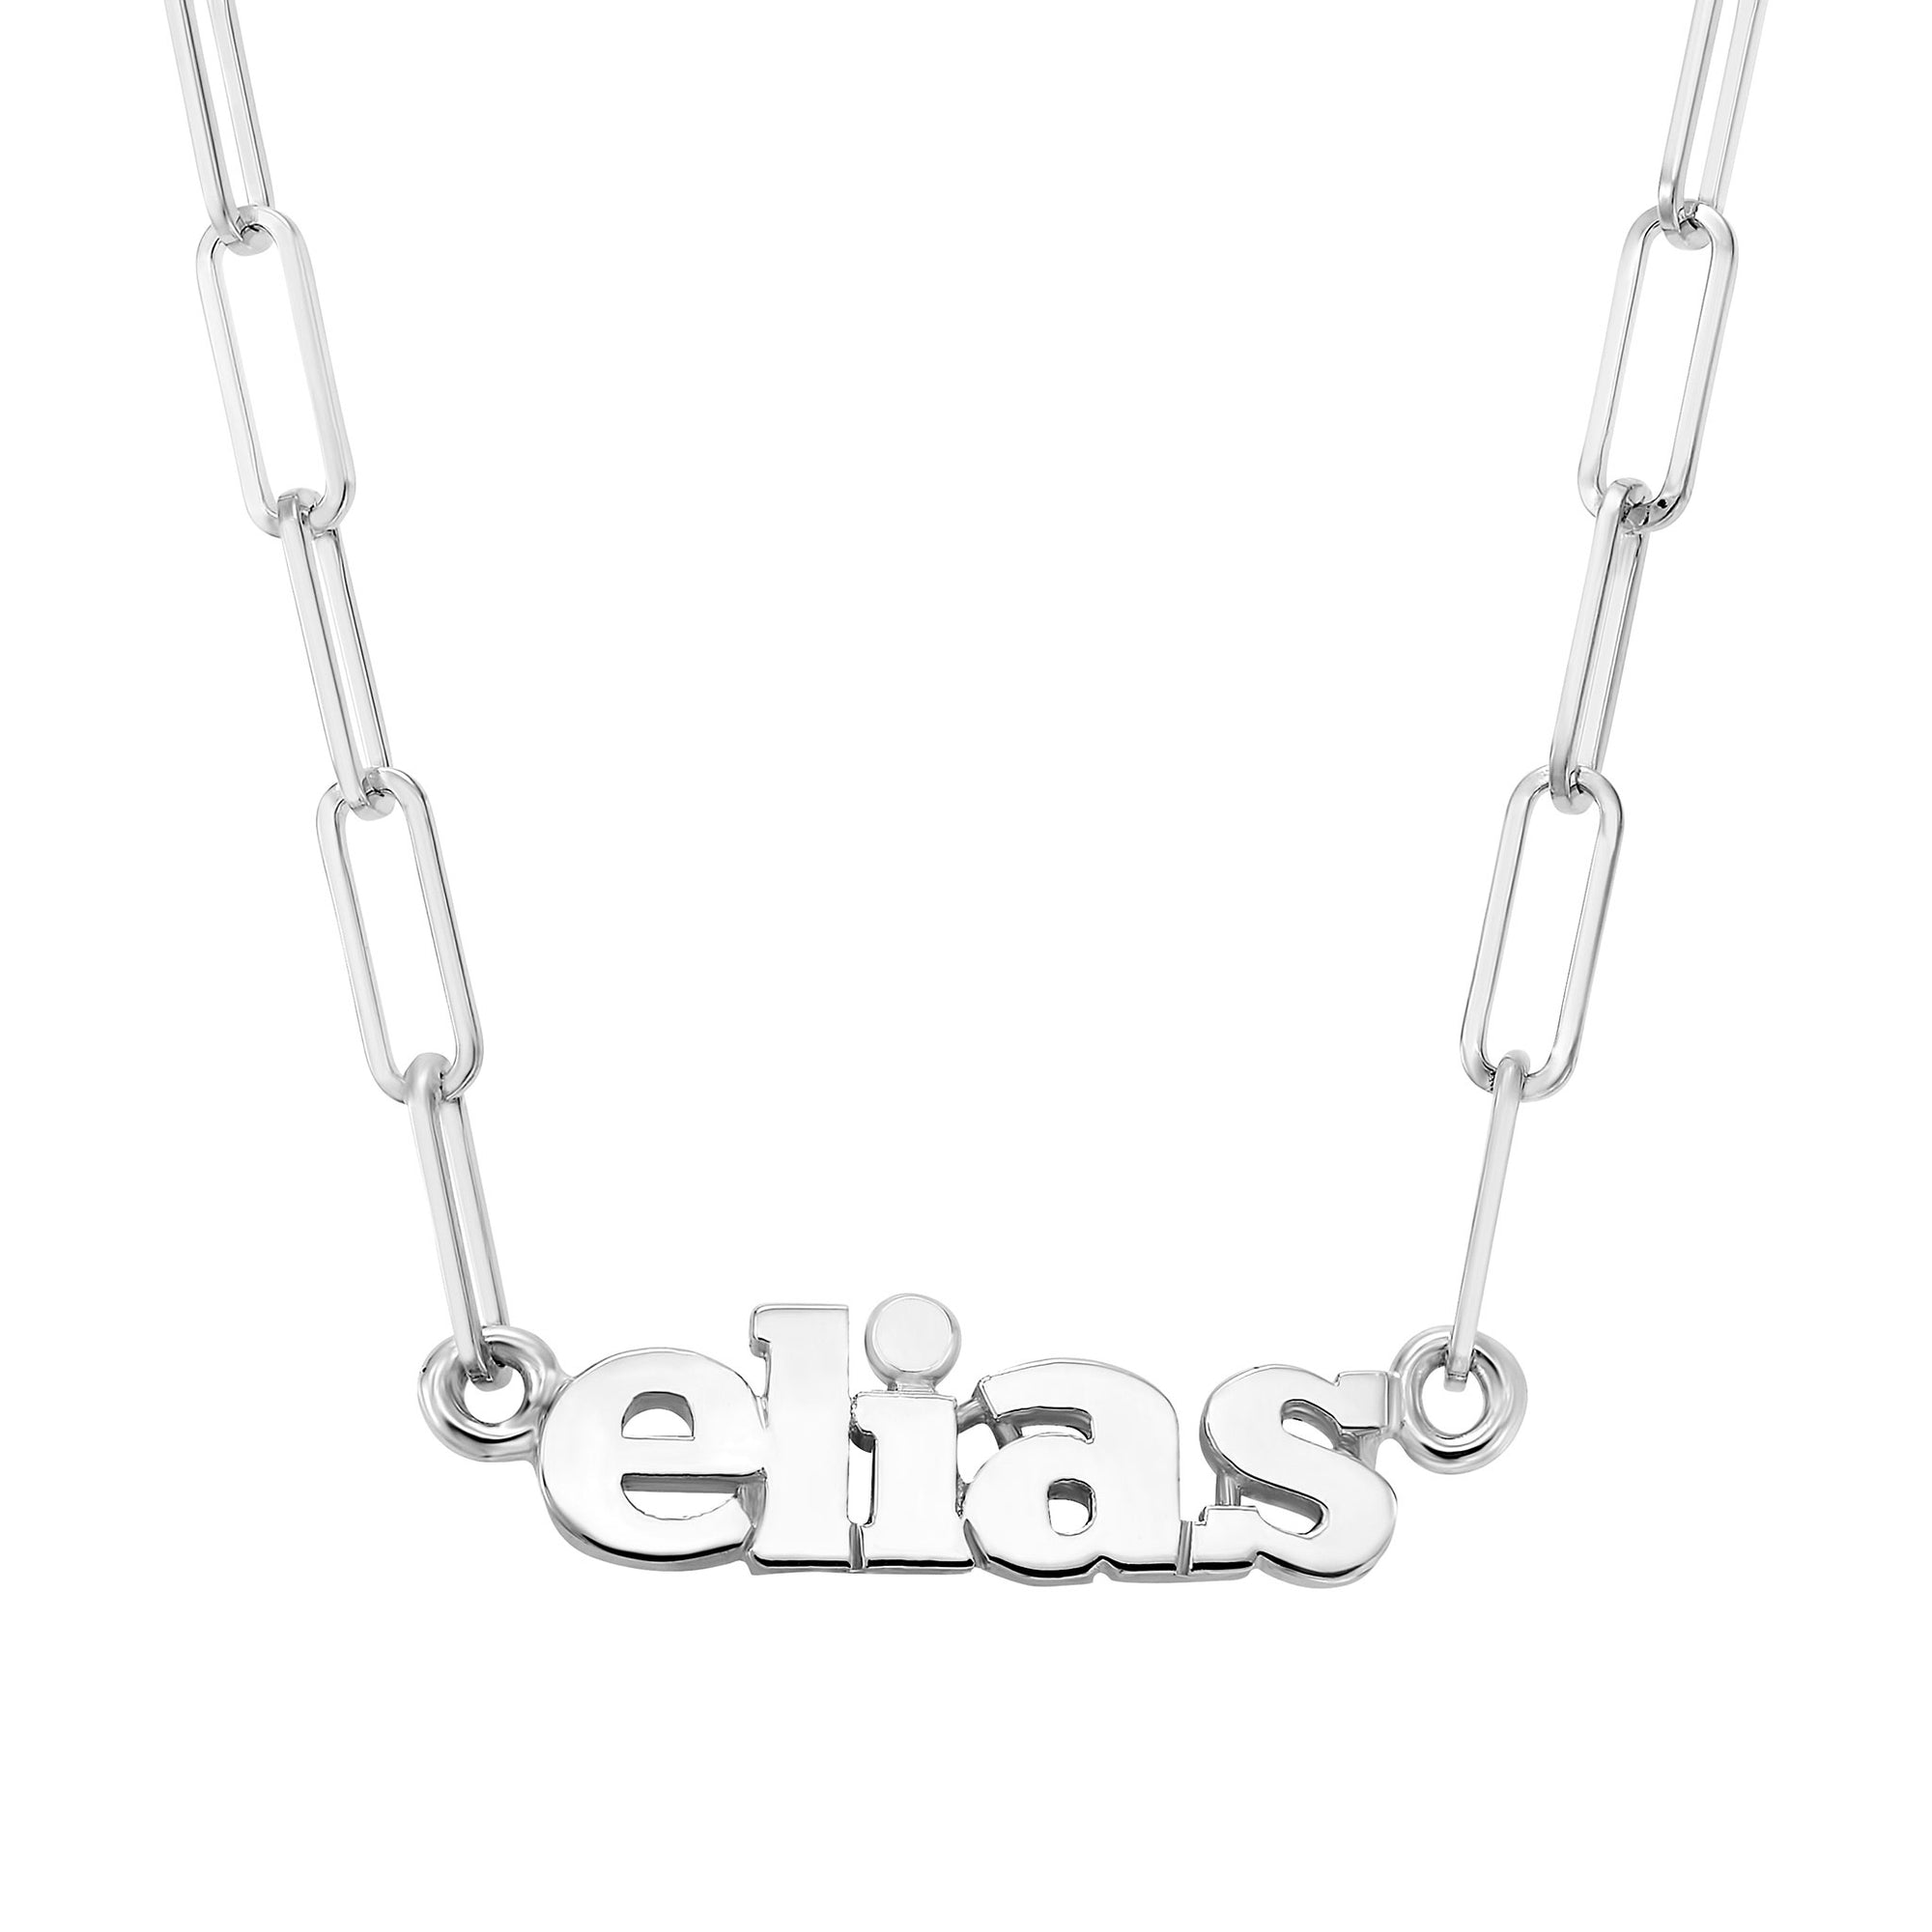 Chain Link Necklace with Names - Sterling Silver Necklace